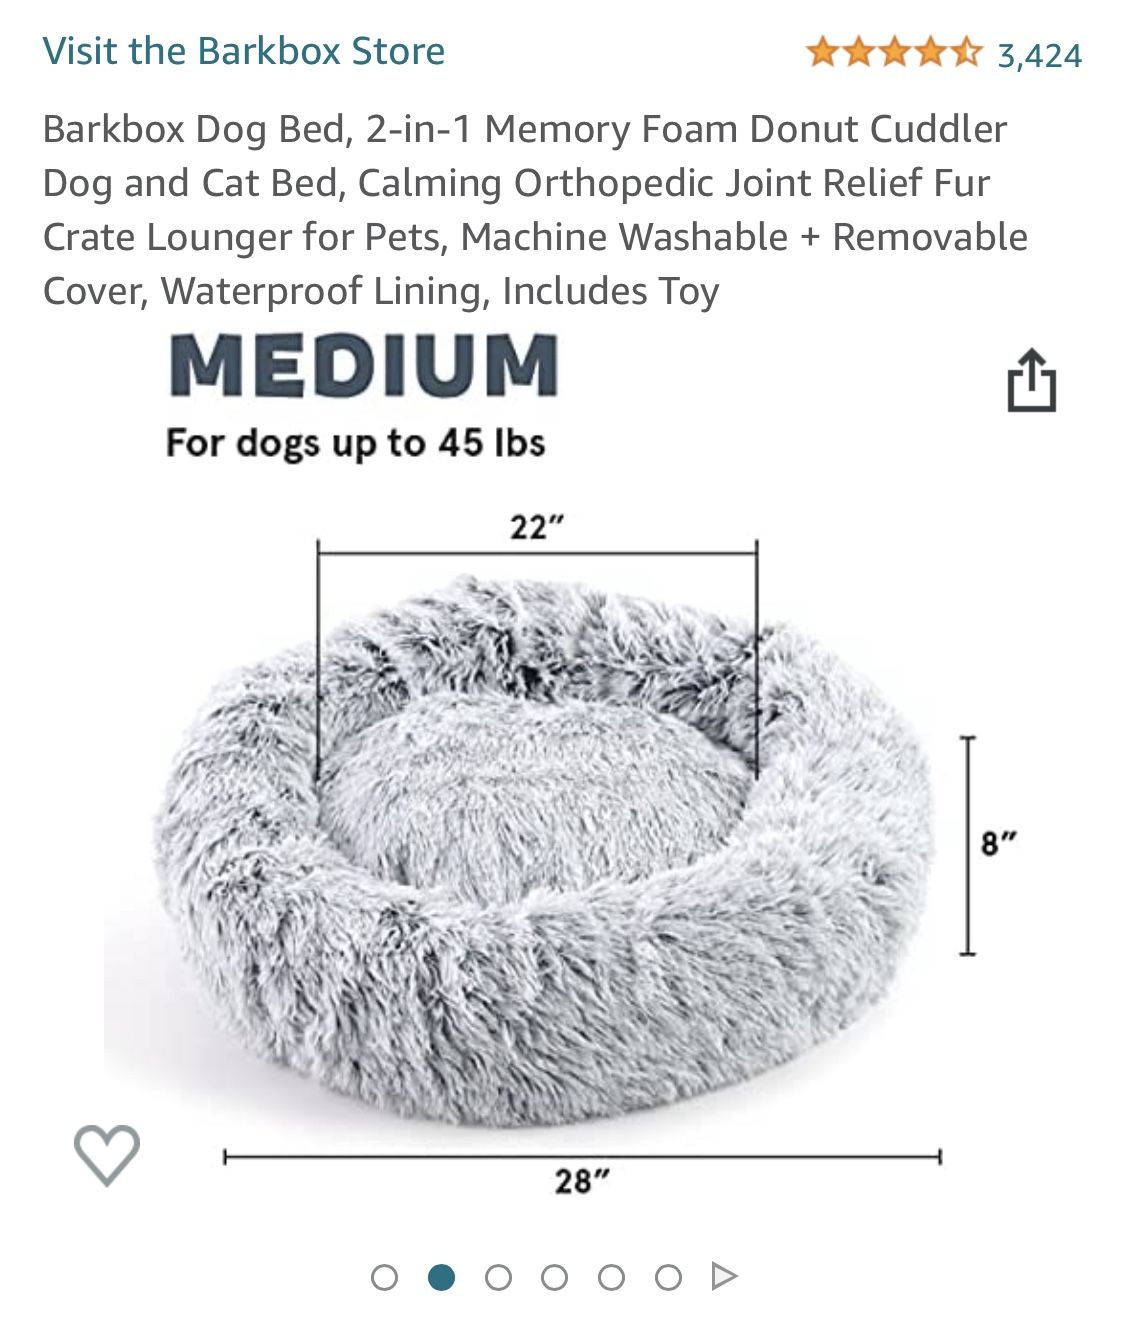 Barkbox Dog Bed, 2-in-1 Memory Foam Donut Cuddler Dog and Cat Bed, Calming Orthopedic Joint Relief Fur Lounger for Pets, Machine Washable